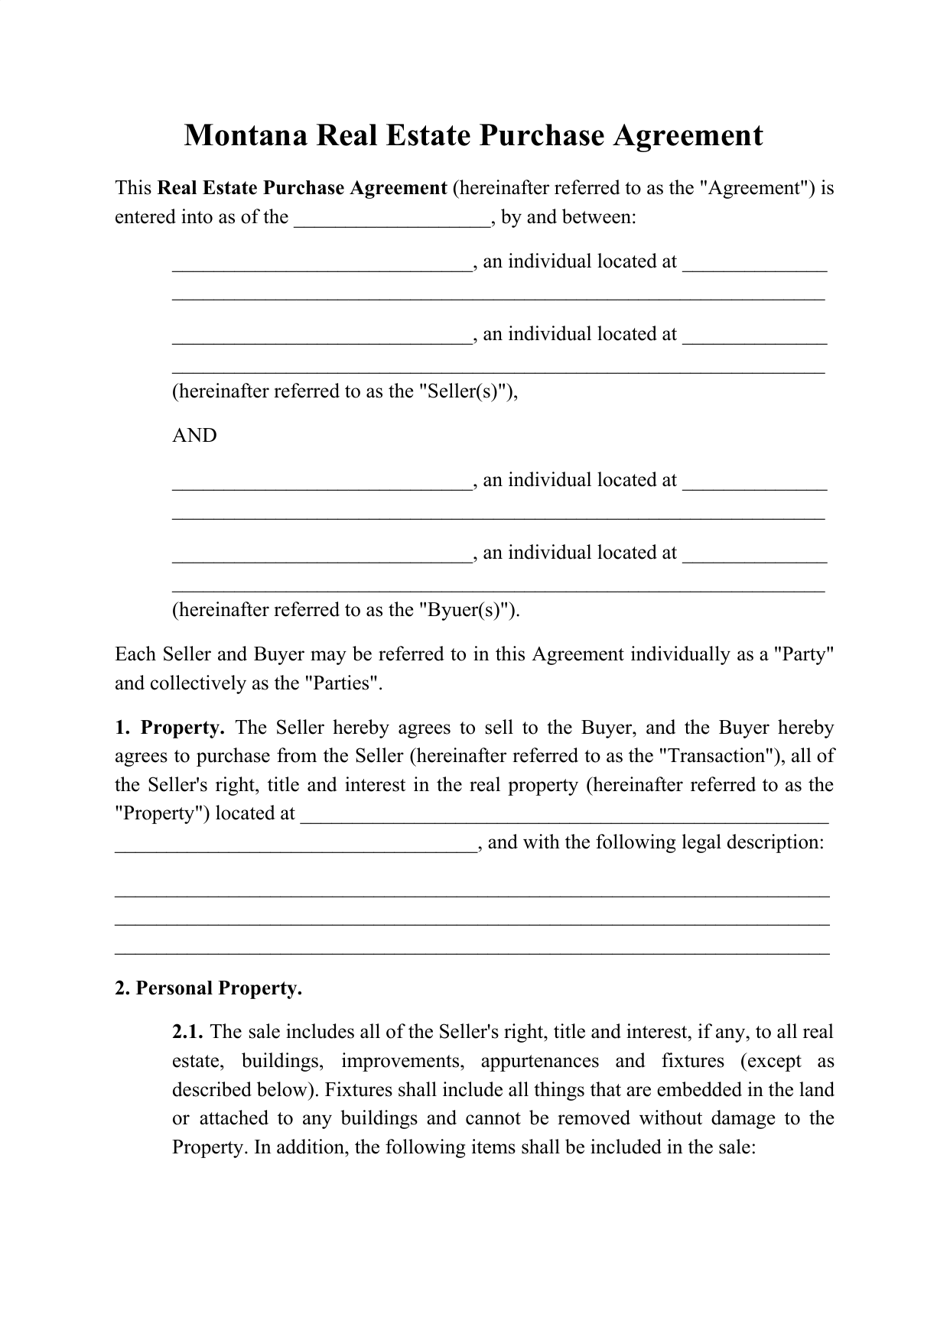 montana-real-estate-purchase-agreement-template-fill-out-sign-online